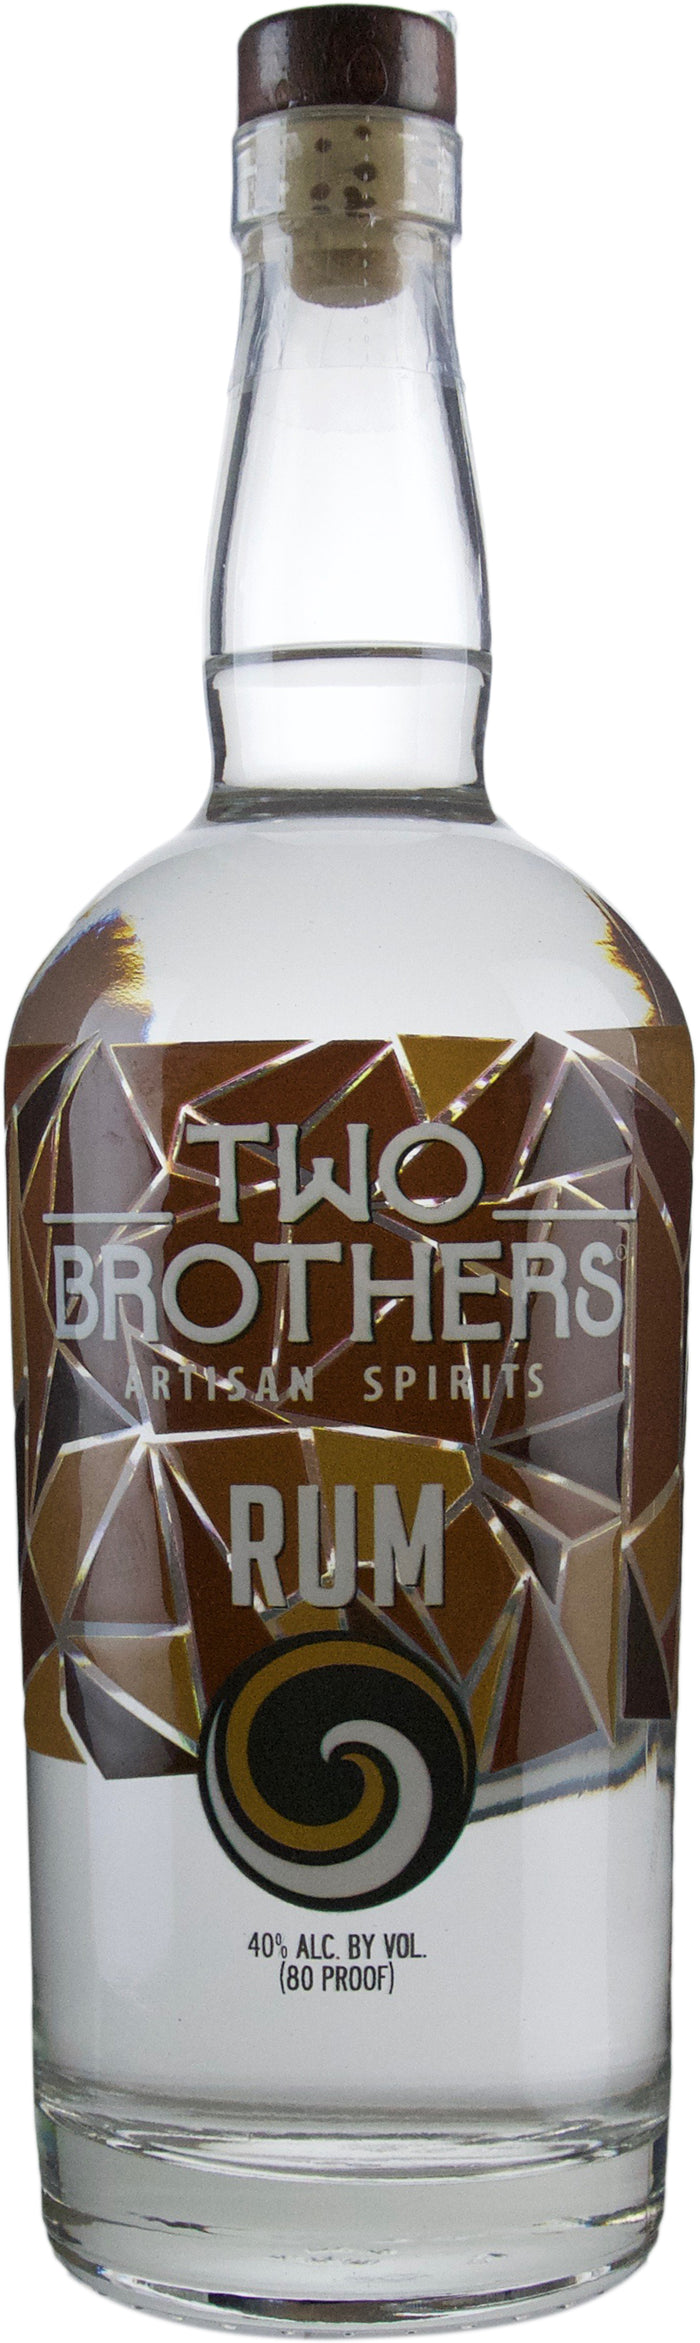 Two Brothers White Rum